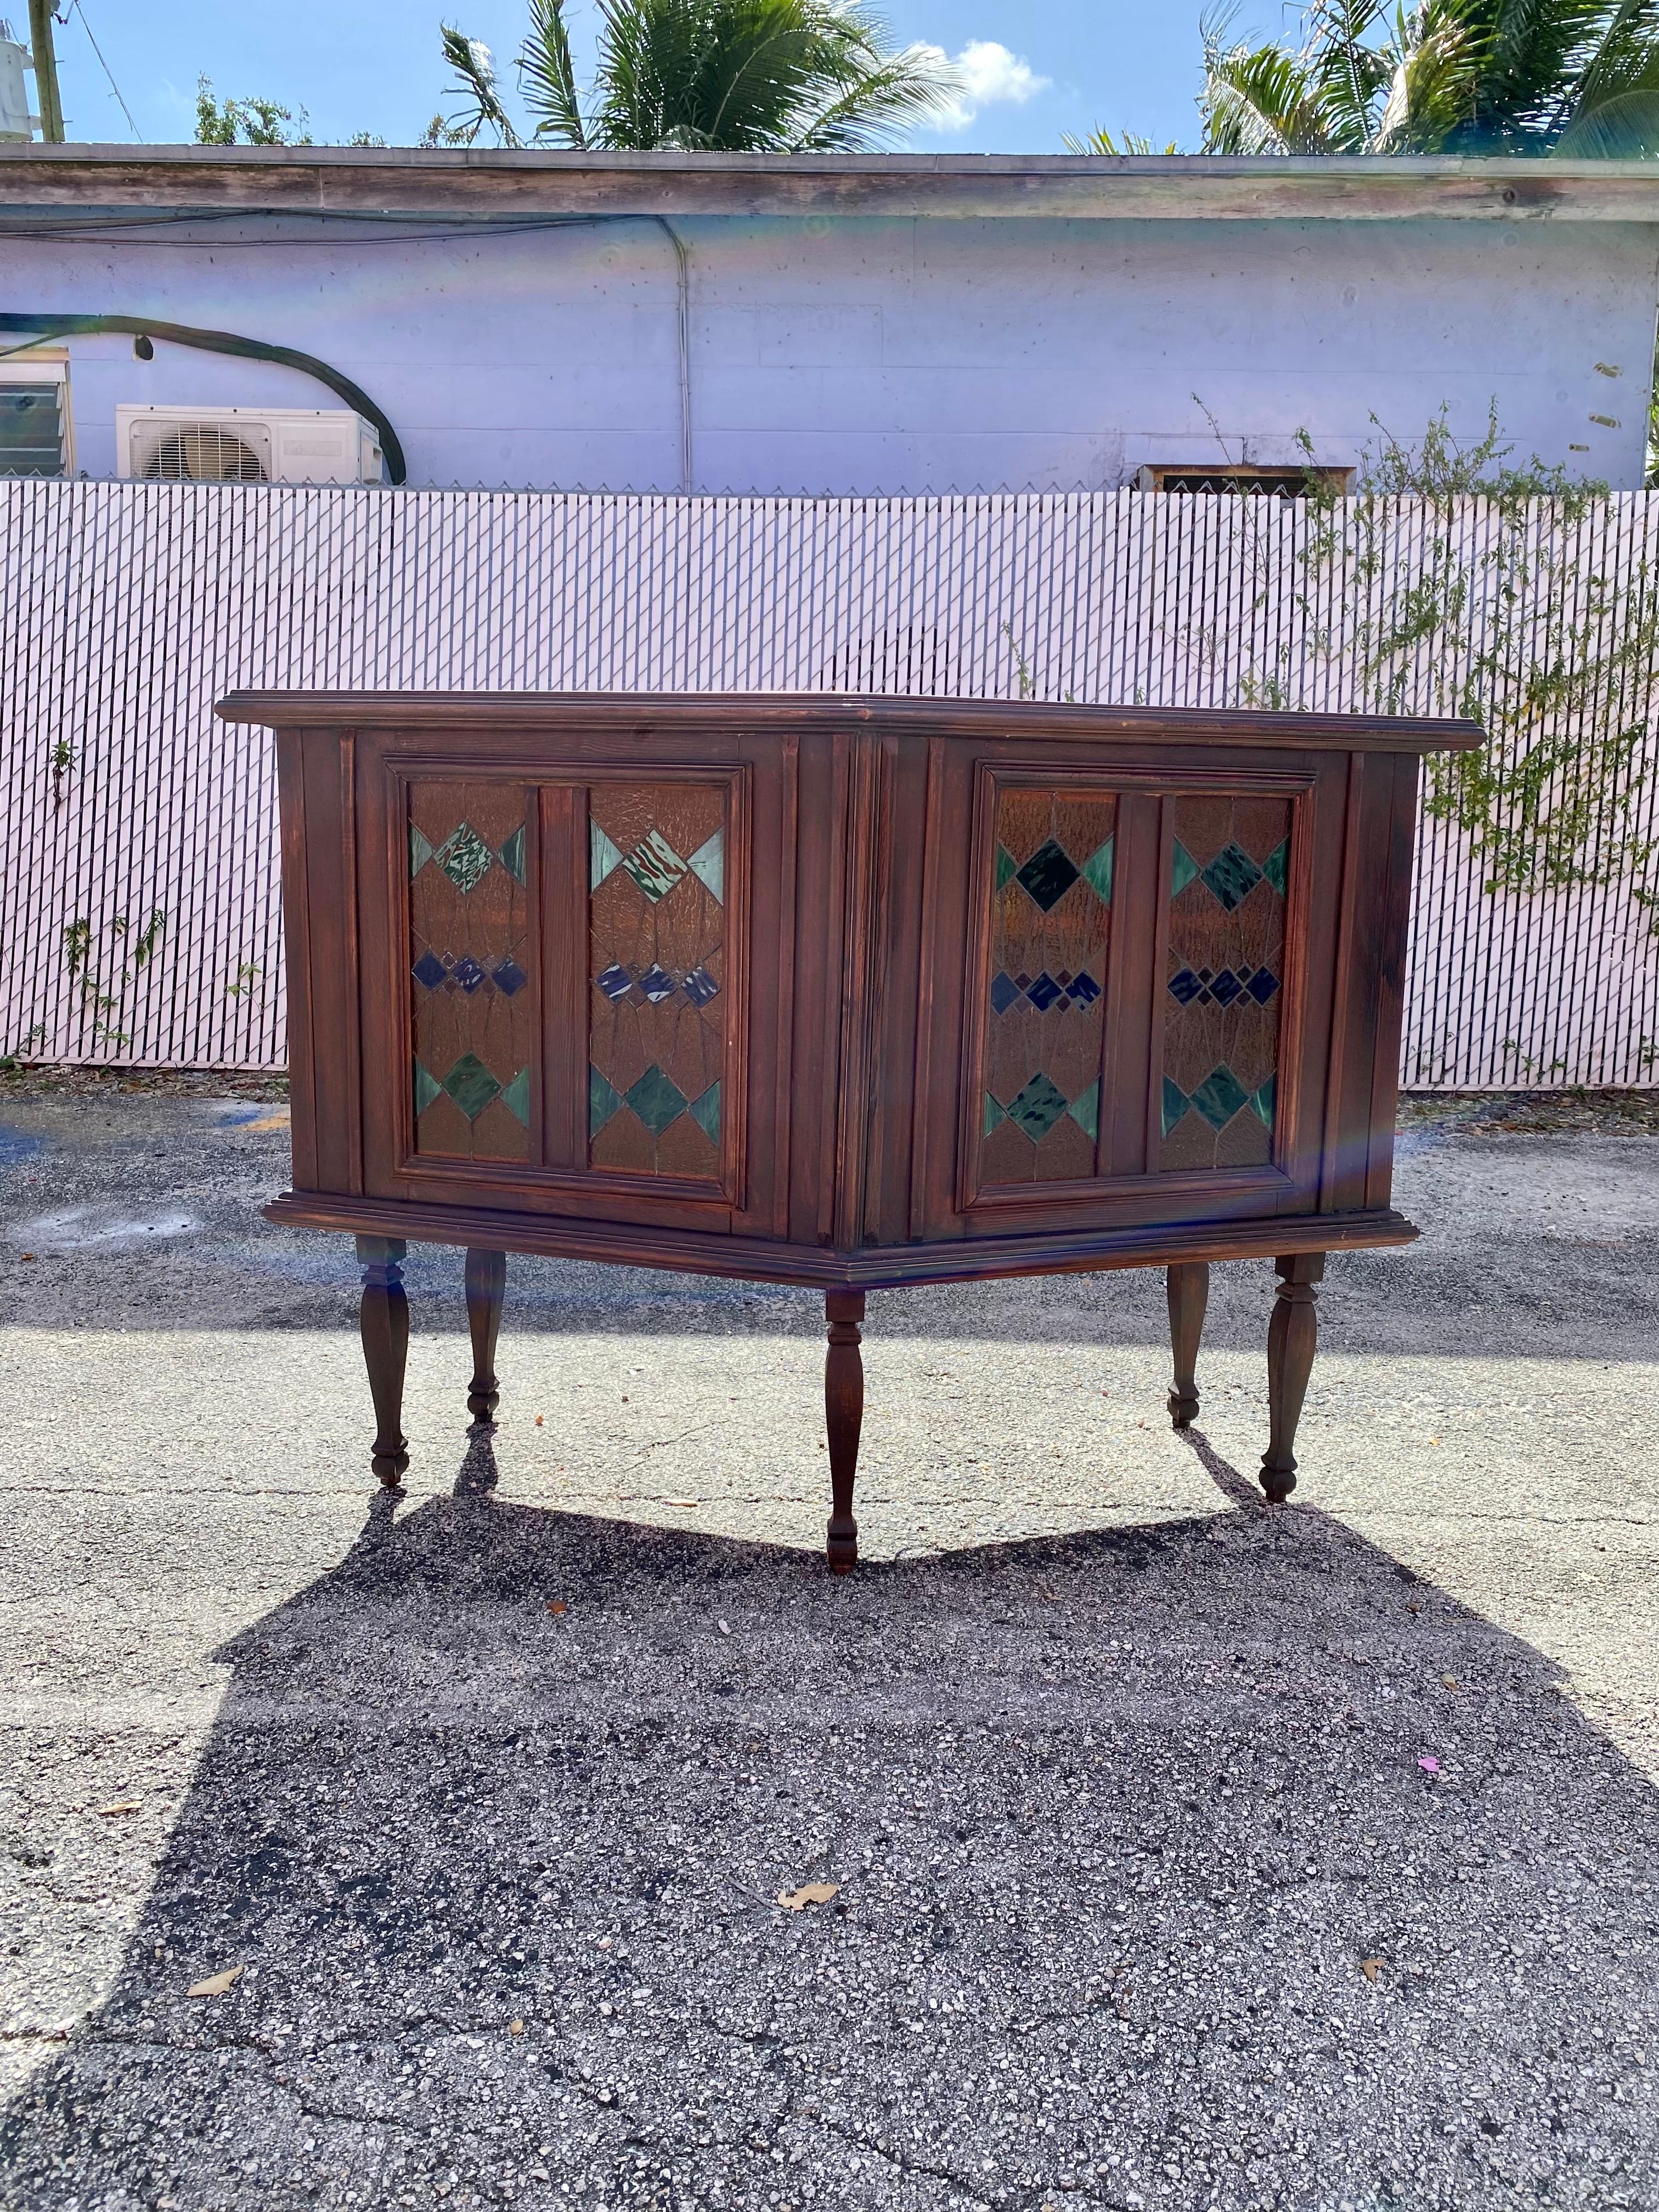 French 1940s Art Deco Angular Marble Tile Stained Glass Bar Cabinet Console For Sale